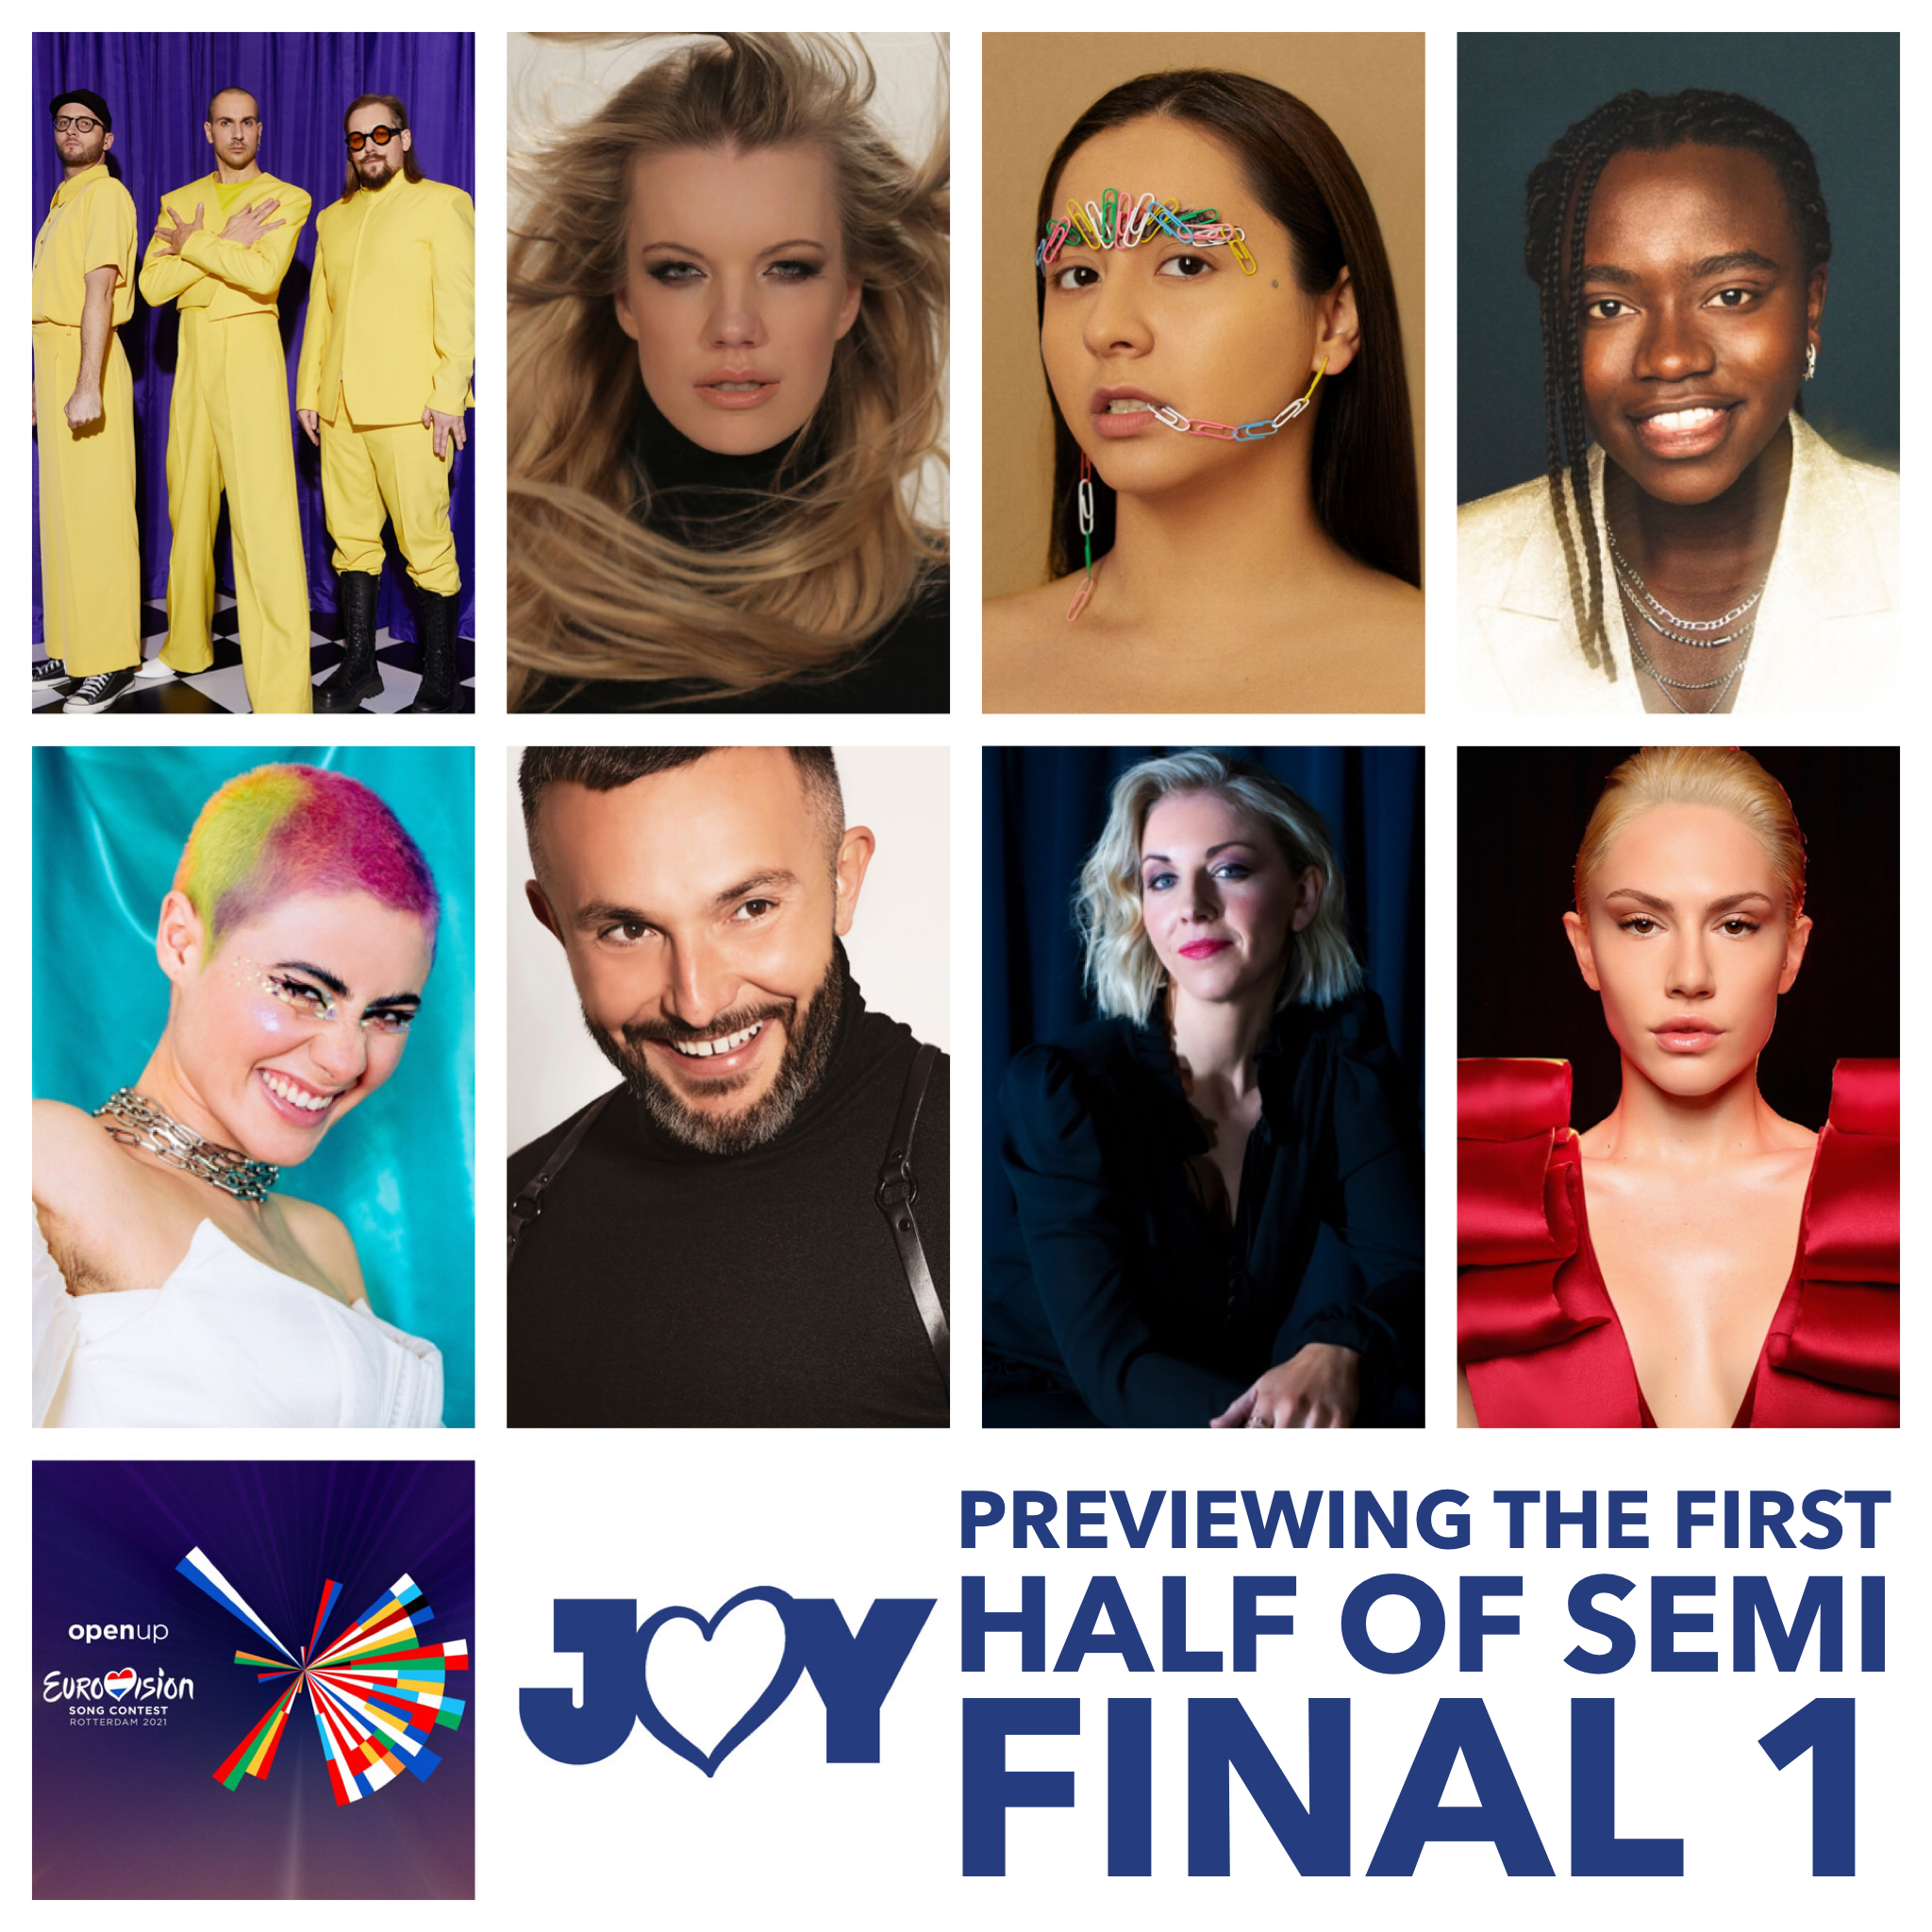 #OpenUp: Previewing the first half of Eurovision 2021 Semi Final 1